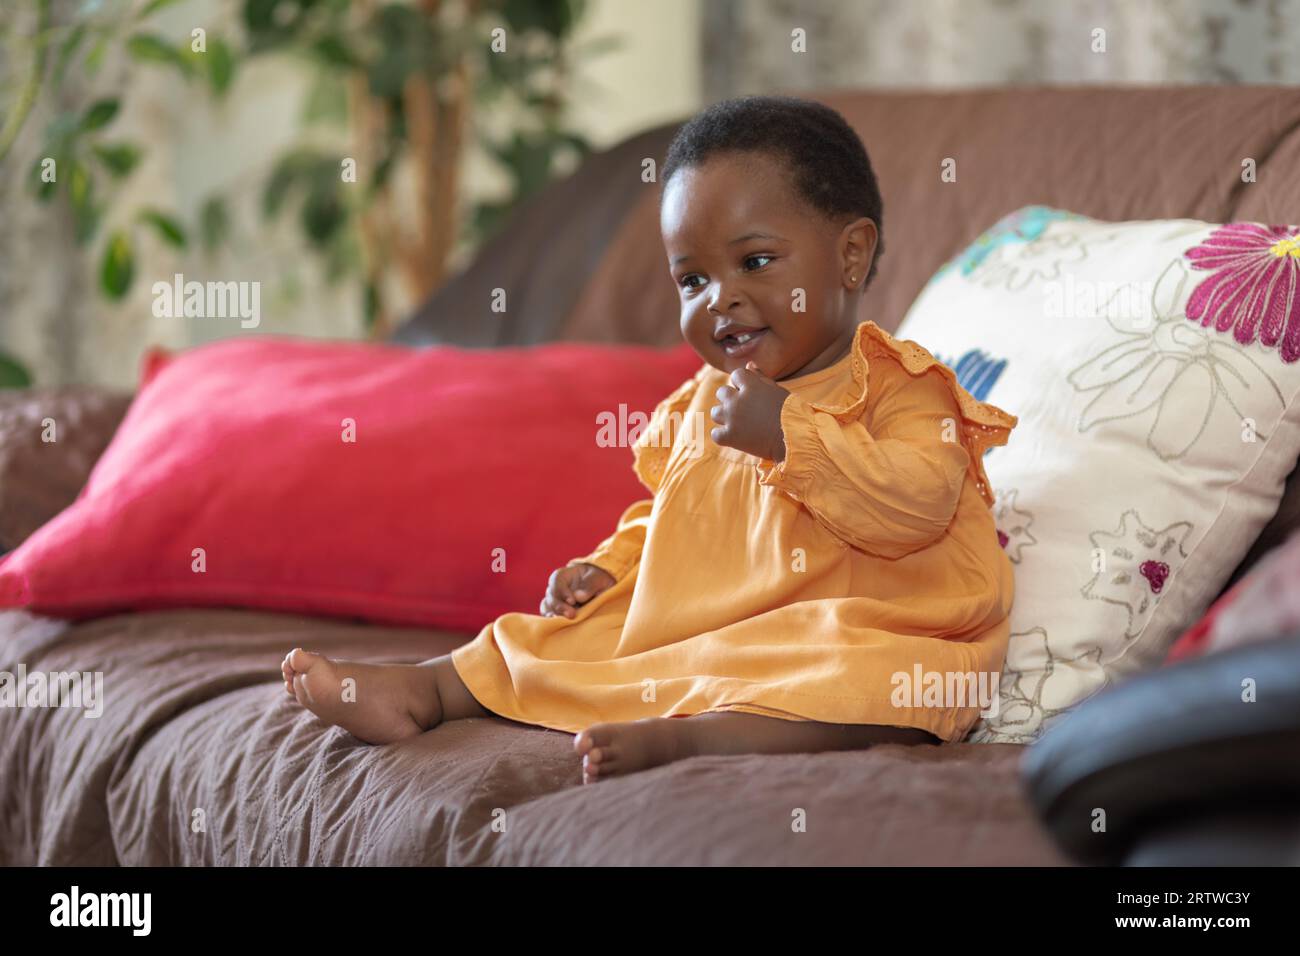 Portrait of a smiling black baby girl dressed in an orange dress sitting on a couch Stock Photo